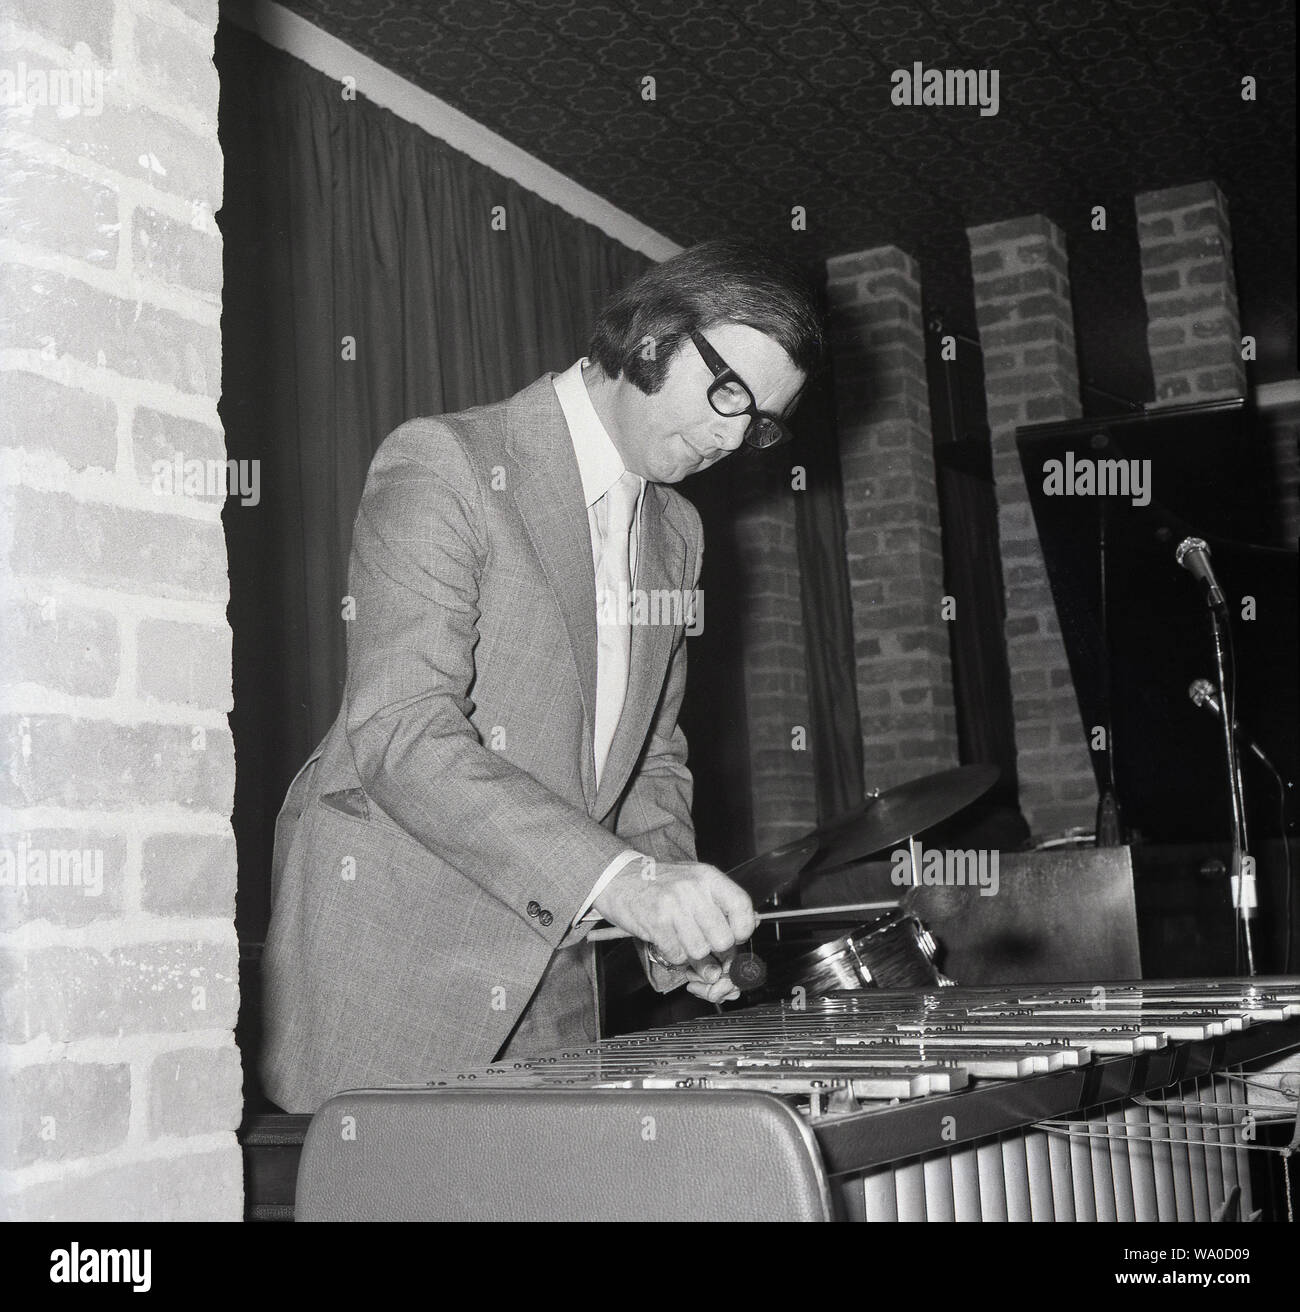 1960s, historical, a musician in a suit and tie witht yarn coated wooden mallets in his hands playing the marimba in an indoor venue, London, England, UK. The marimba, a percussion instrument similar to the xylophone, has a set of wooden bars that when struck produce musical tones. The pipes suspended underneath the bars ampify the sound. Stock Photo